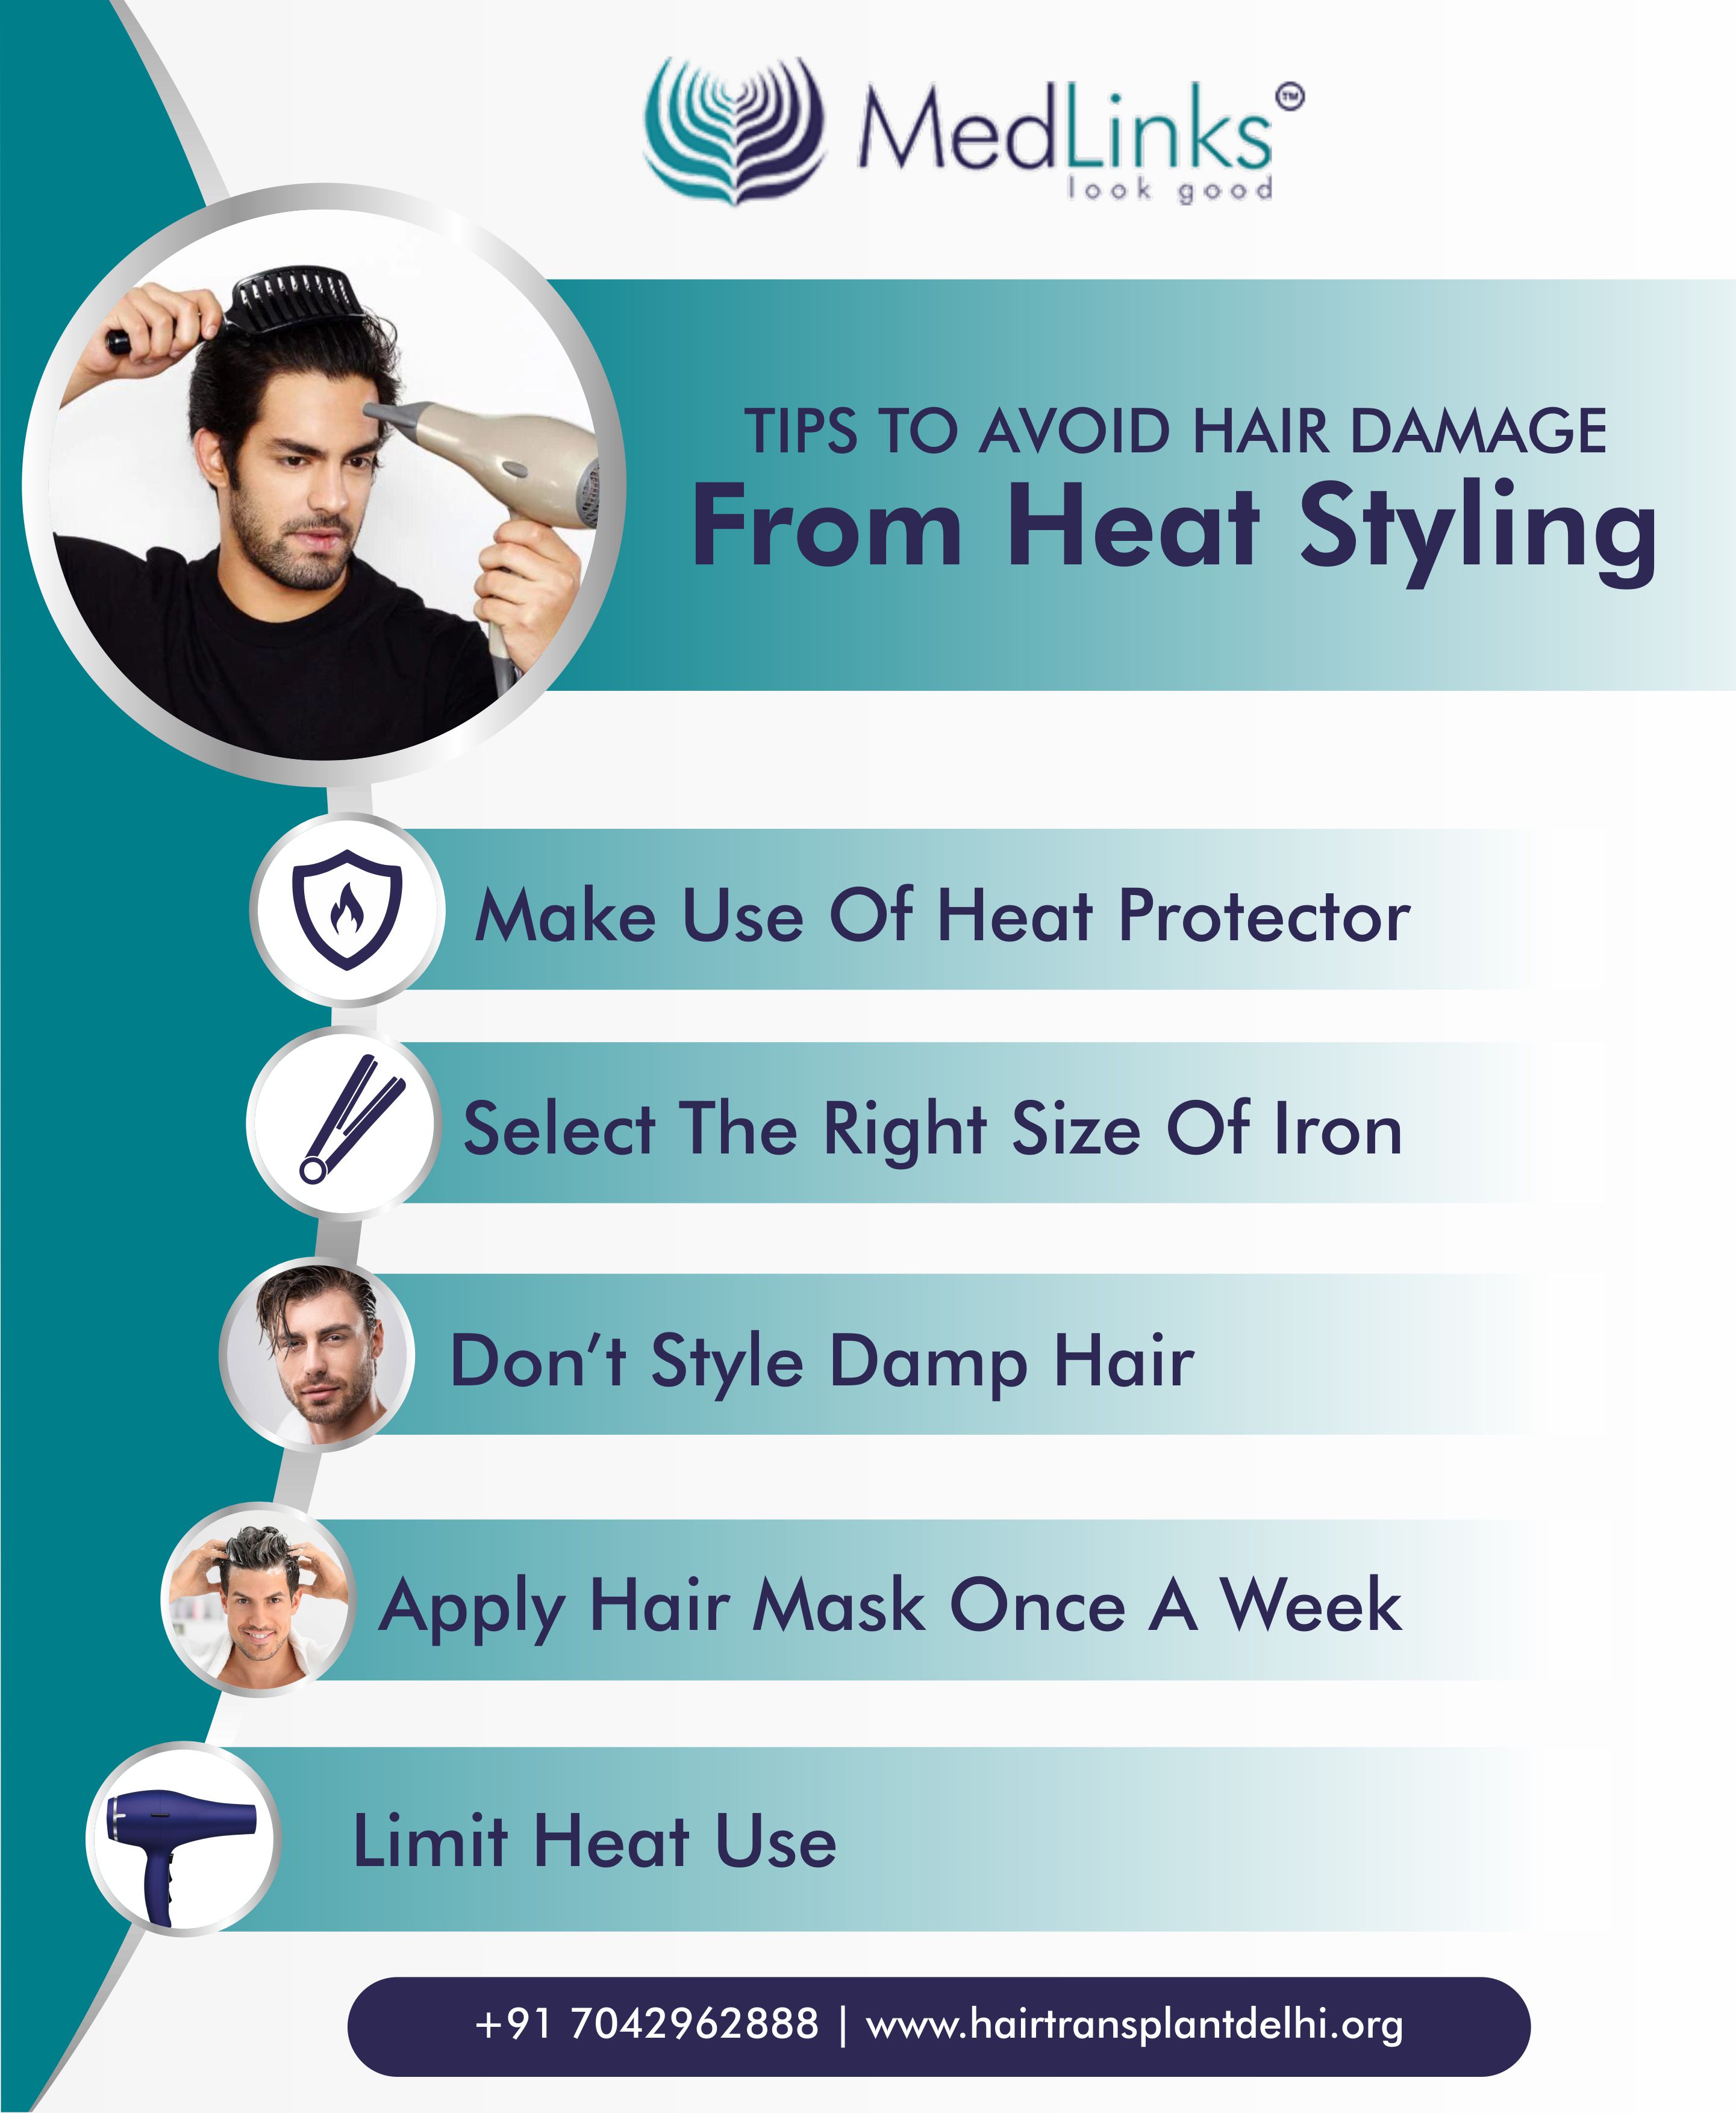 How to Avoid Hair Damage from Blow Dryers, Flat Irons ,and Curling Irons?